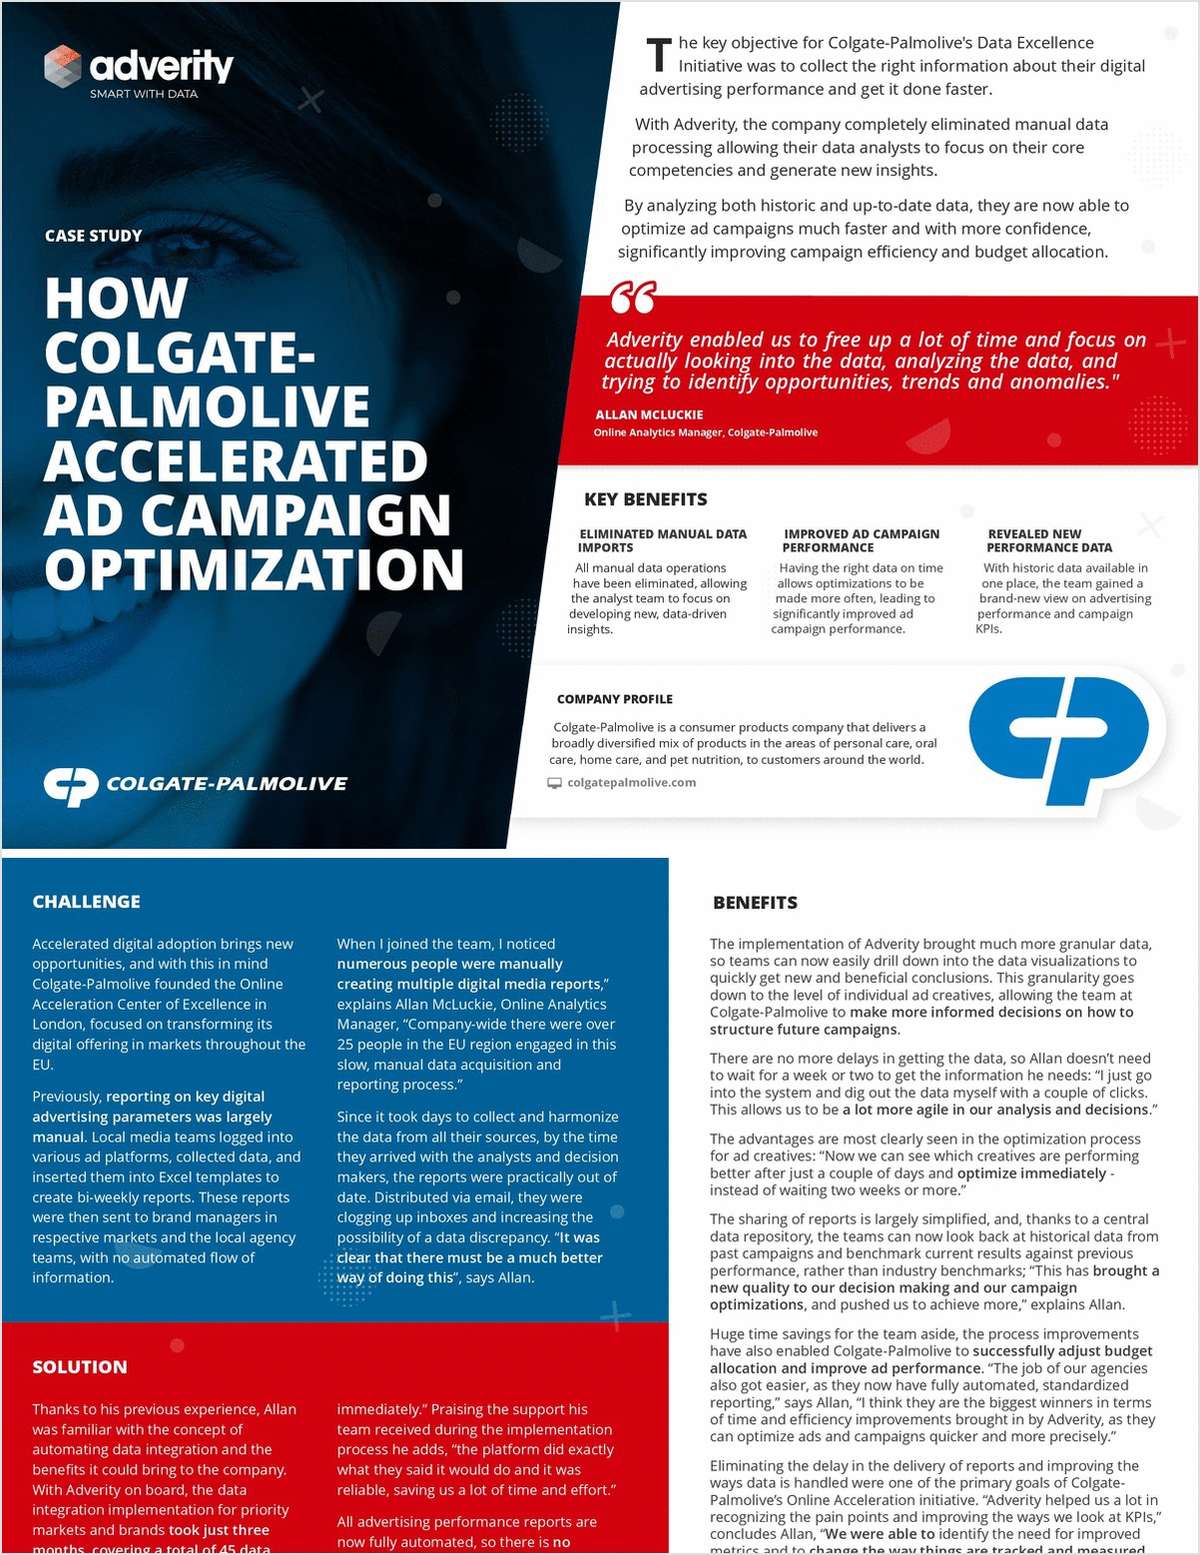 HOW COLGATE-PALMOLIVE ACCELERATED AD CAMPAIGN OPTIMIZATION